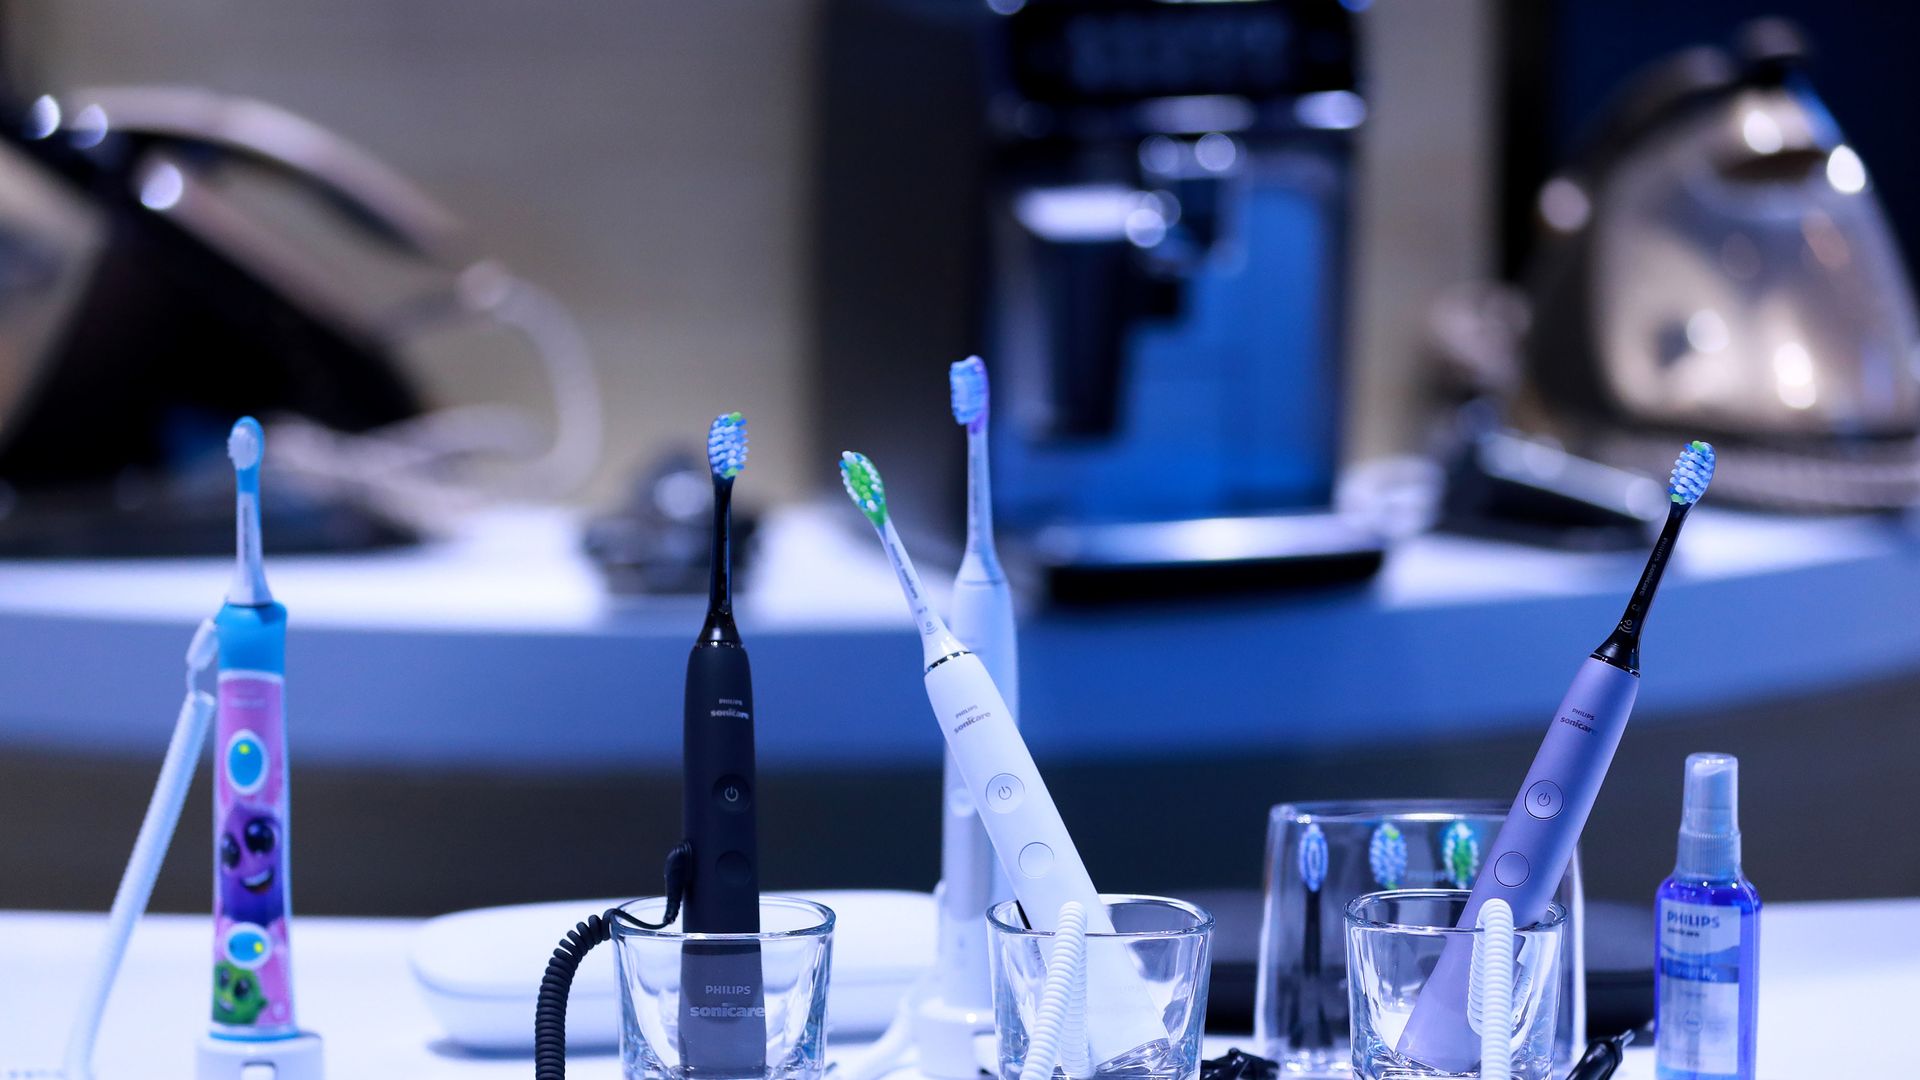 Image of a set of electric toothbrushes in cups on a table